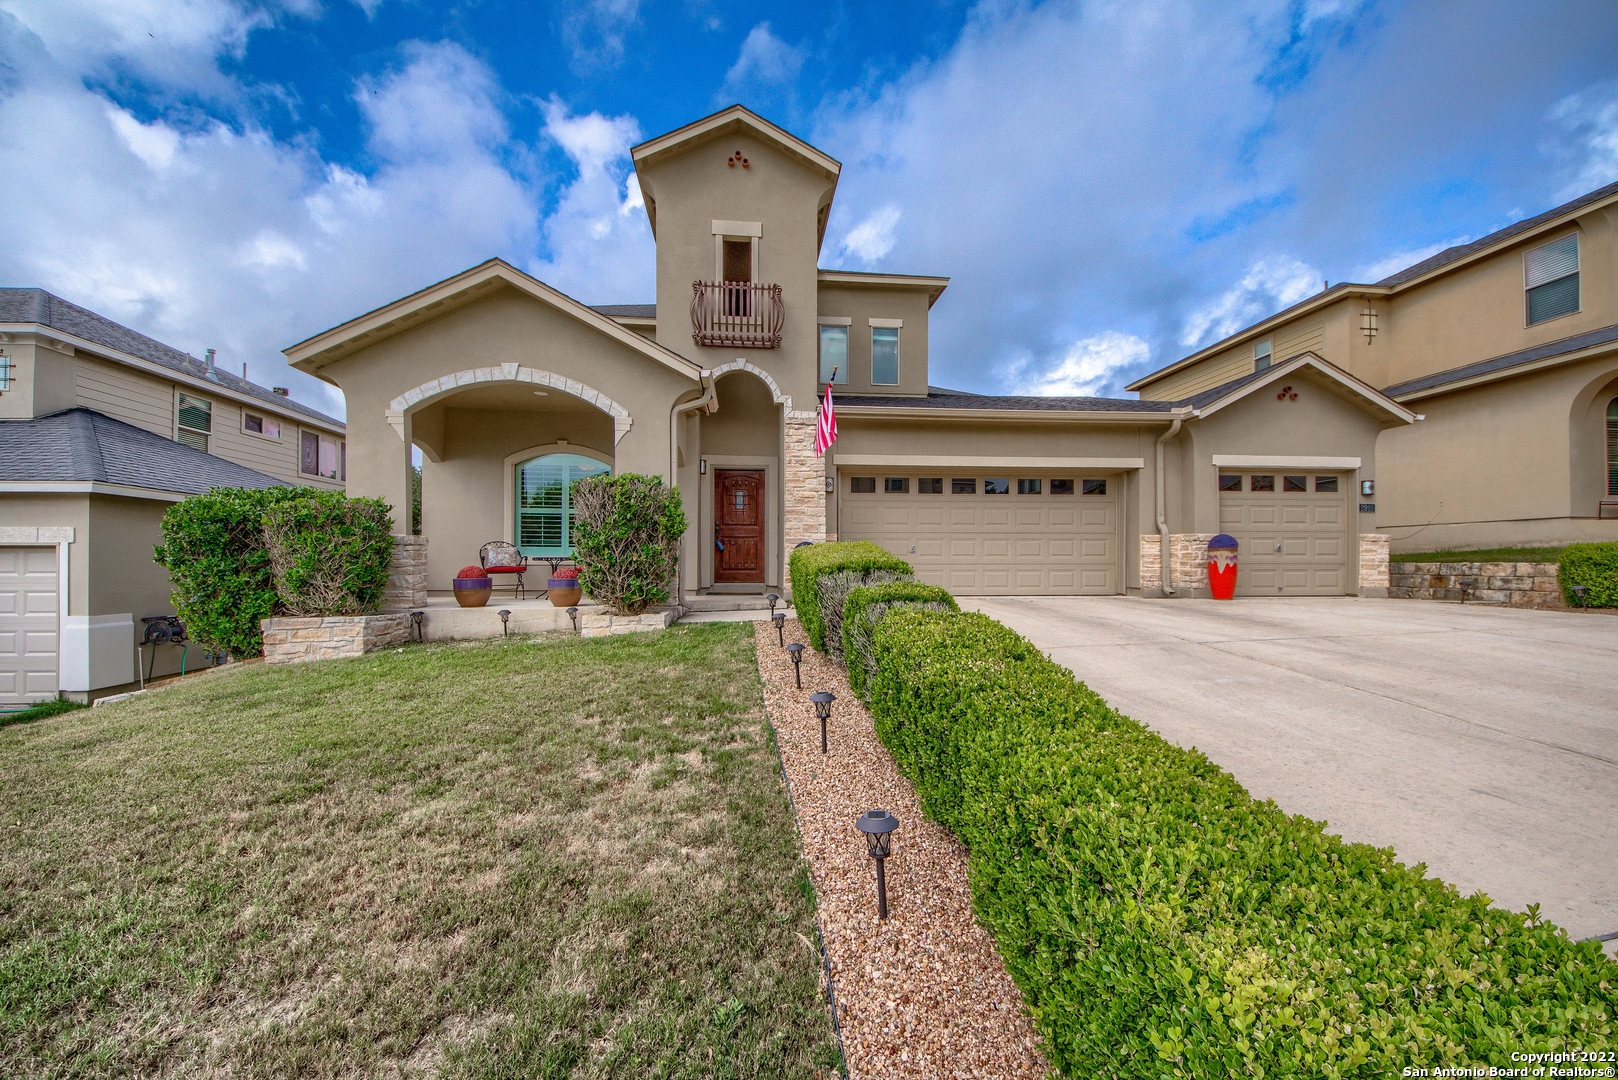 Exceptional Stone Oak Home with a pool within the Cliffs at Cibolo gated community!  The immaculate home features an inviting and open floorplan with a multitude of upgrades.  This 2-story, 3,062 sqft, 4-bedroom, 3-bathroom home rests on a lot of .185 acres.  The open space in the foyer welcomes you to richly appointed spaces that include a large office, living room (with gas fireplace), dining area, secondary bedroom, bonus room, butler pantry, and a gourmet kitchen with granite countertops, stainless steel appliances (double ovens), and large cabinets with ample storage space.  The spacious owners retreat with luxurious en-suite bathroom, 2 secondary bedrooms, and a large game room are located on the second floor.  Additional amenities include 3 car garage, covered back patio that overlooks the tranquil in-ground pool built in 2020 and a storage shed.  Central Air conditioning units replaced in February of 2022.  The relaxing surroundings will lead to outdoor living at it's finest.  This property has it all!  A very special home within the NEISD school district that is conveniently located closely to Hwy 281, Loop 1604, and I10 and is near numerous shopping, entertainment, education, and dining locations (Village at Stone Oak, The Rim, Shops at La Cantera, Fiesta Texas, Johnson High School, and UTSA).  This amazing property will not last long...Don't miss the opportunity to make this special house your home!